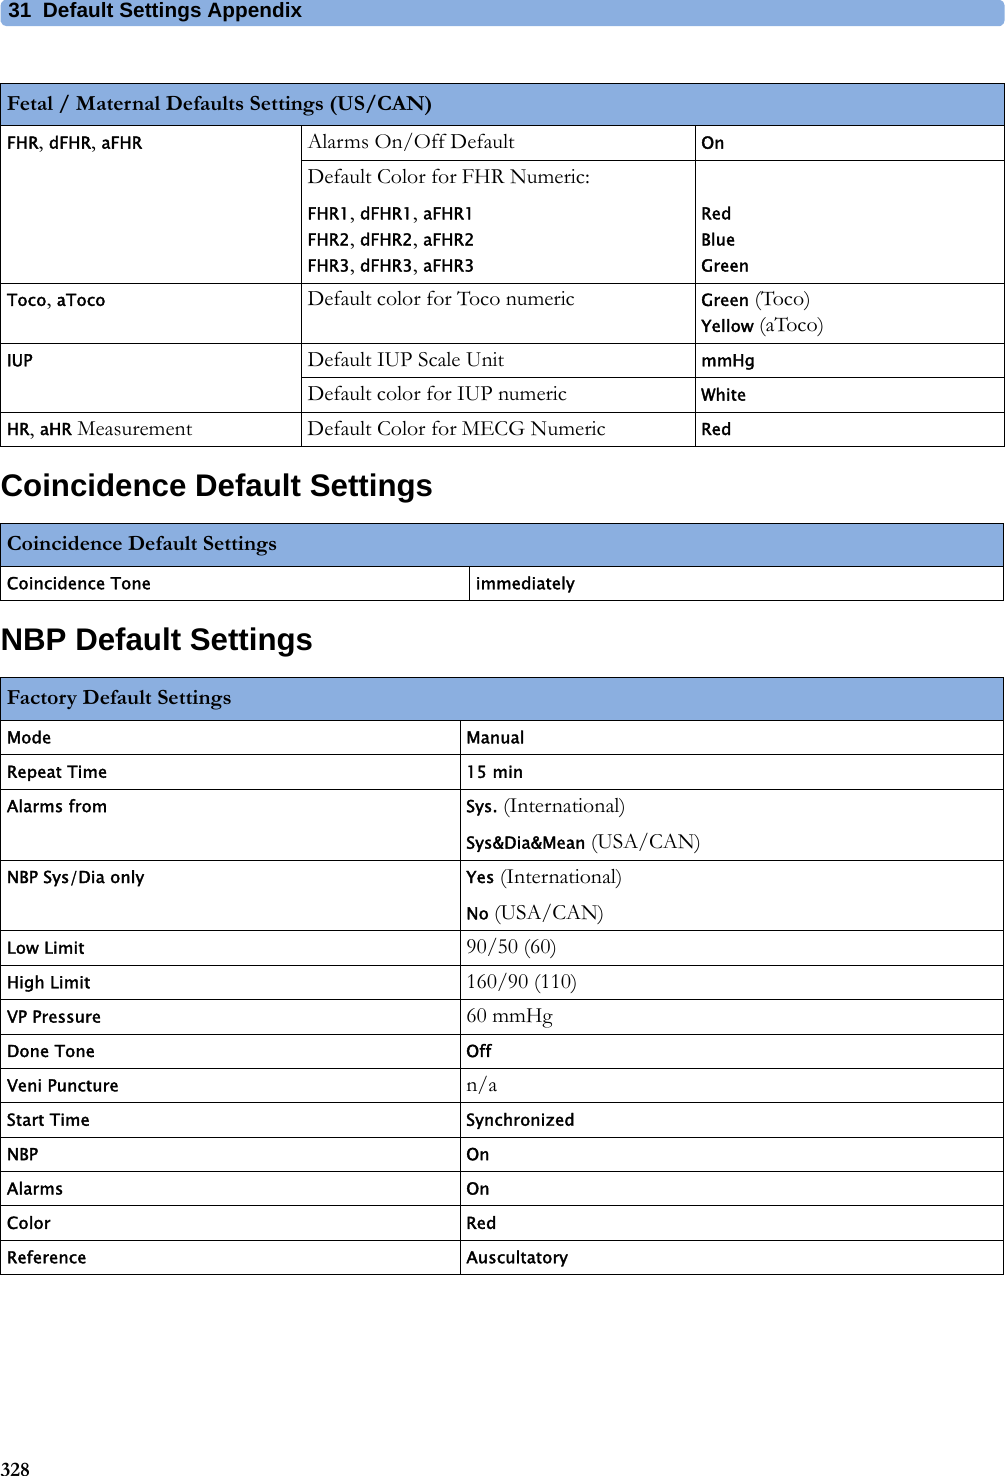 31  Default Settings Appendix328Coincidence Default SettingsNBP Default SettingsFetal / Maternal Defaults Settings (US/CAN)FHR, dFHR, aFHR Alarms On/Off Default OnDefault Color for FHR Numeric:FHR1, dFHR1, aFHR1 FHR2, dFHR2, aFHR2 FHR3, dFHR3, aFHR3Red Blue GreenToco, aToco Default color for Toco numeric Green (Toco) Yellow (aToco)IUP Default IUP Scale Unit mmHgDefault color for IUP numeric WhiteHR, aHR Measurement Default Color for MECG Numeric RedCoincidence Default SettingsCoincidence Tone immediatelyFactory Default Settings Mode ManualRepeat Time 15 minAlarms from Sys. (International)Sys&amp;Dia&amp;Mean (USA/CAN)NBP Sys/Dia only Yes (International)No (USA/CAN)Low Limit 90/50 (60)High Limit 160/90 (110)VP Pressure 60 mmHgDone Tone OffVeni Puncture n/aStart Time SynchronizedNBP OnAlarms OnColor RedReference Auscultatory